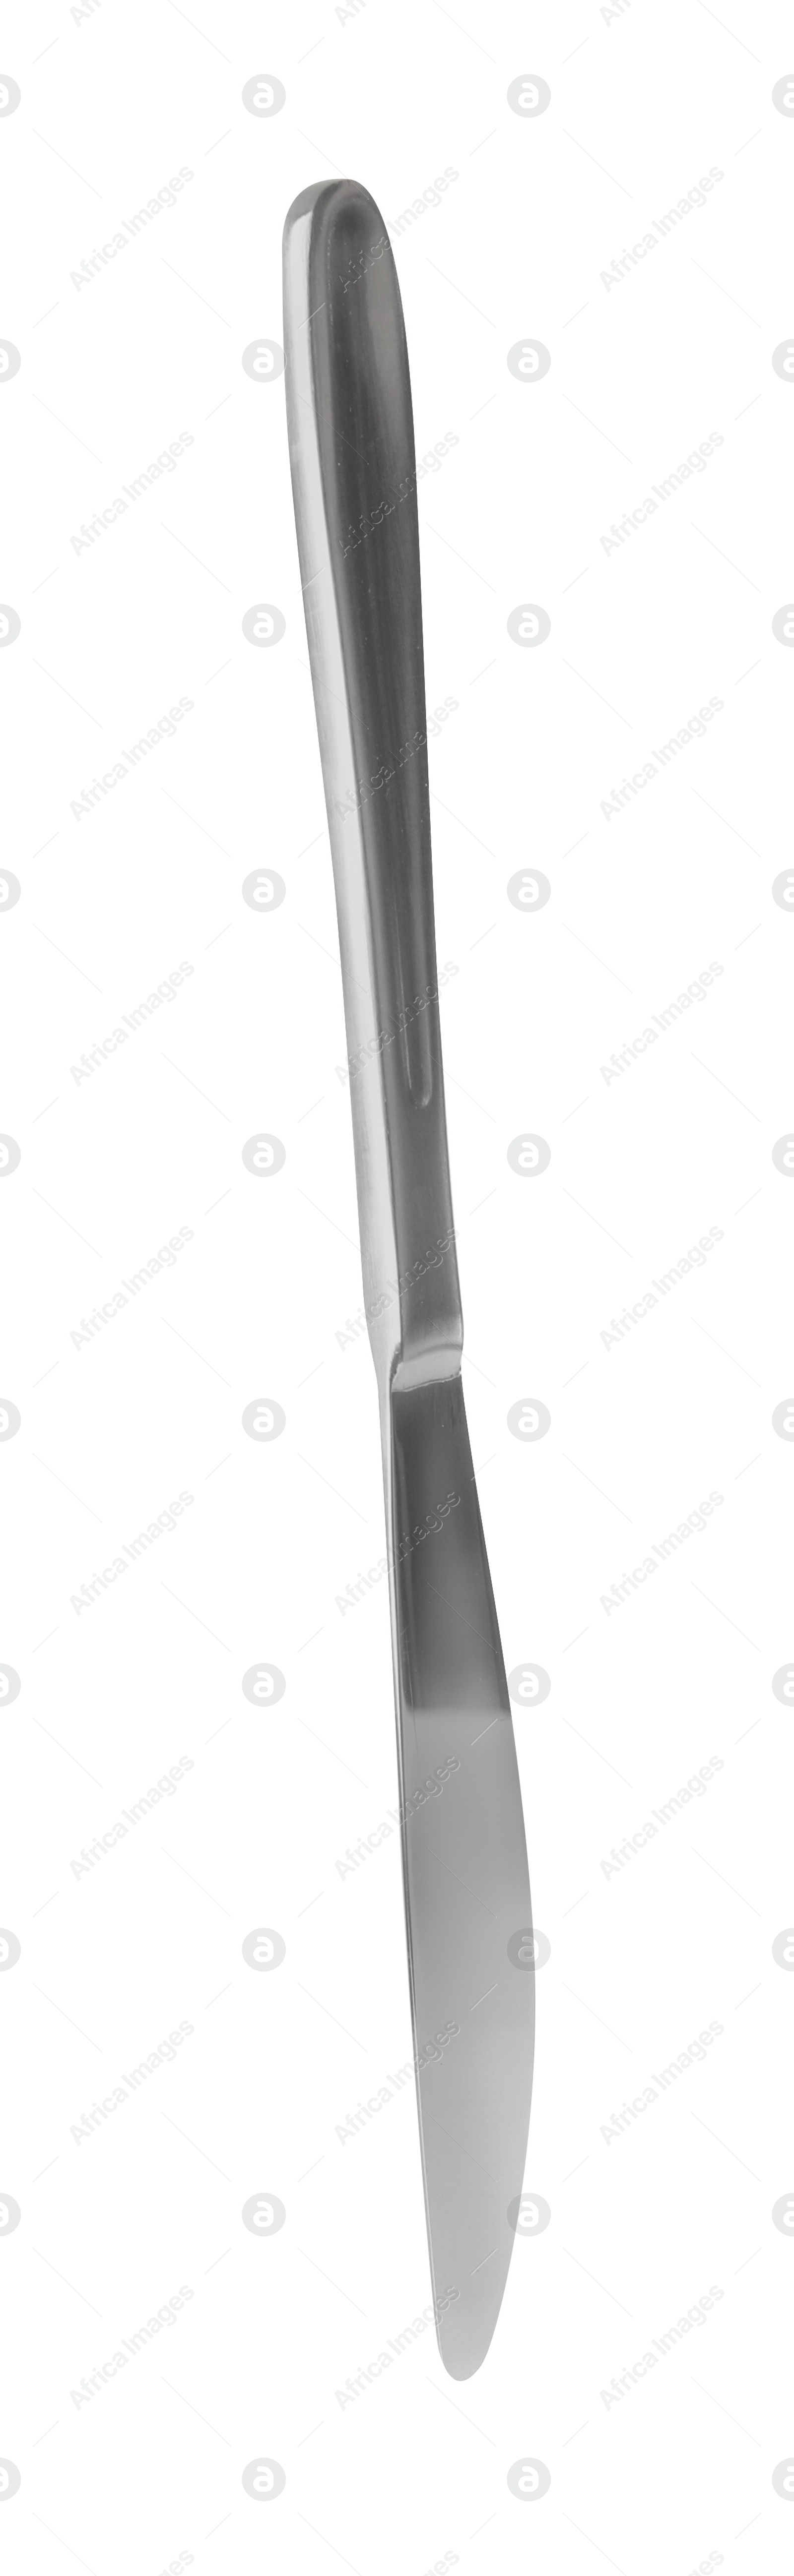 Photo of New clean shiny knife isolated on white